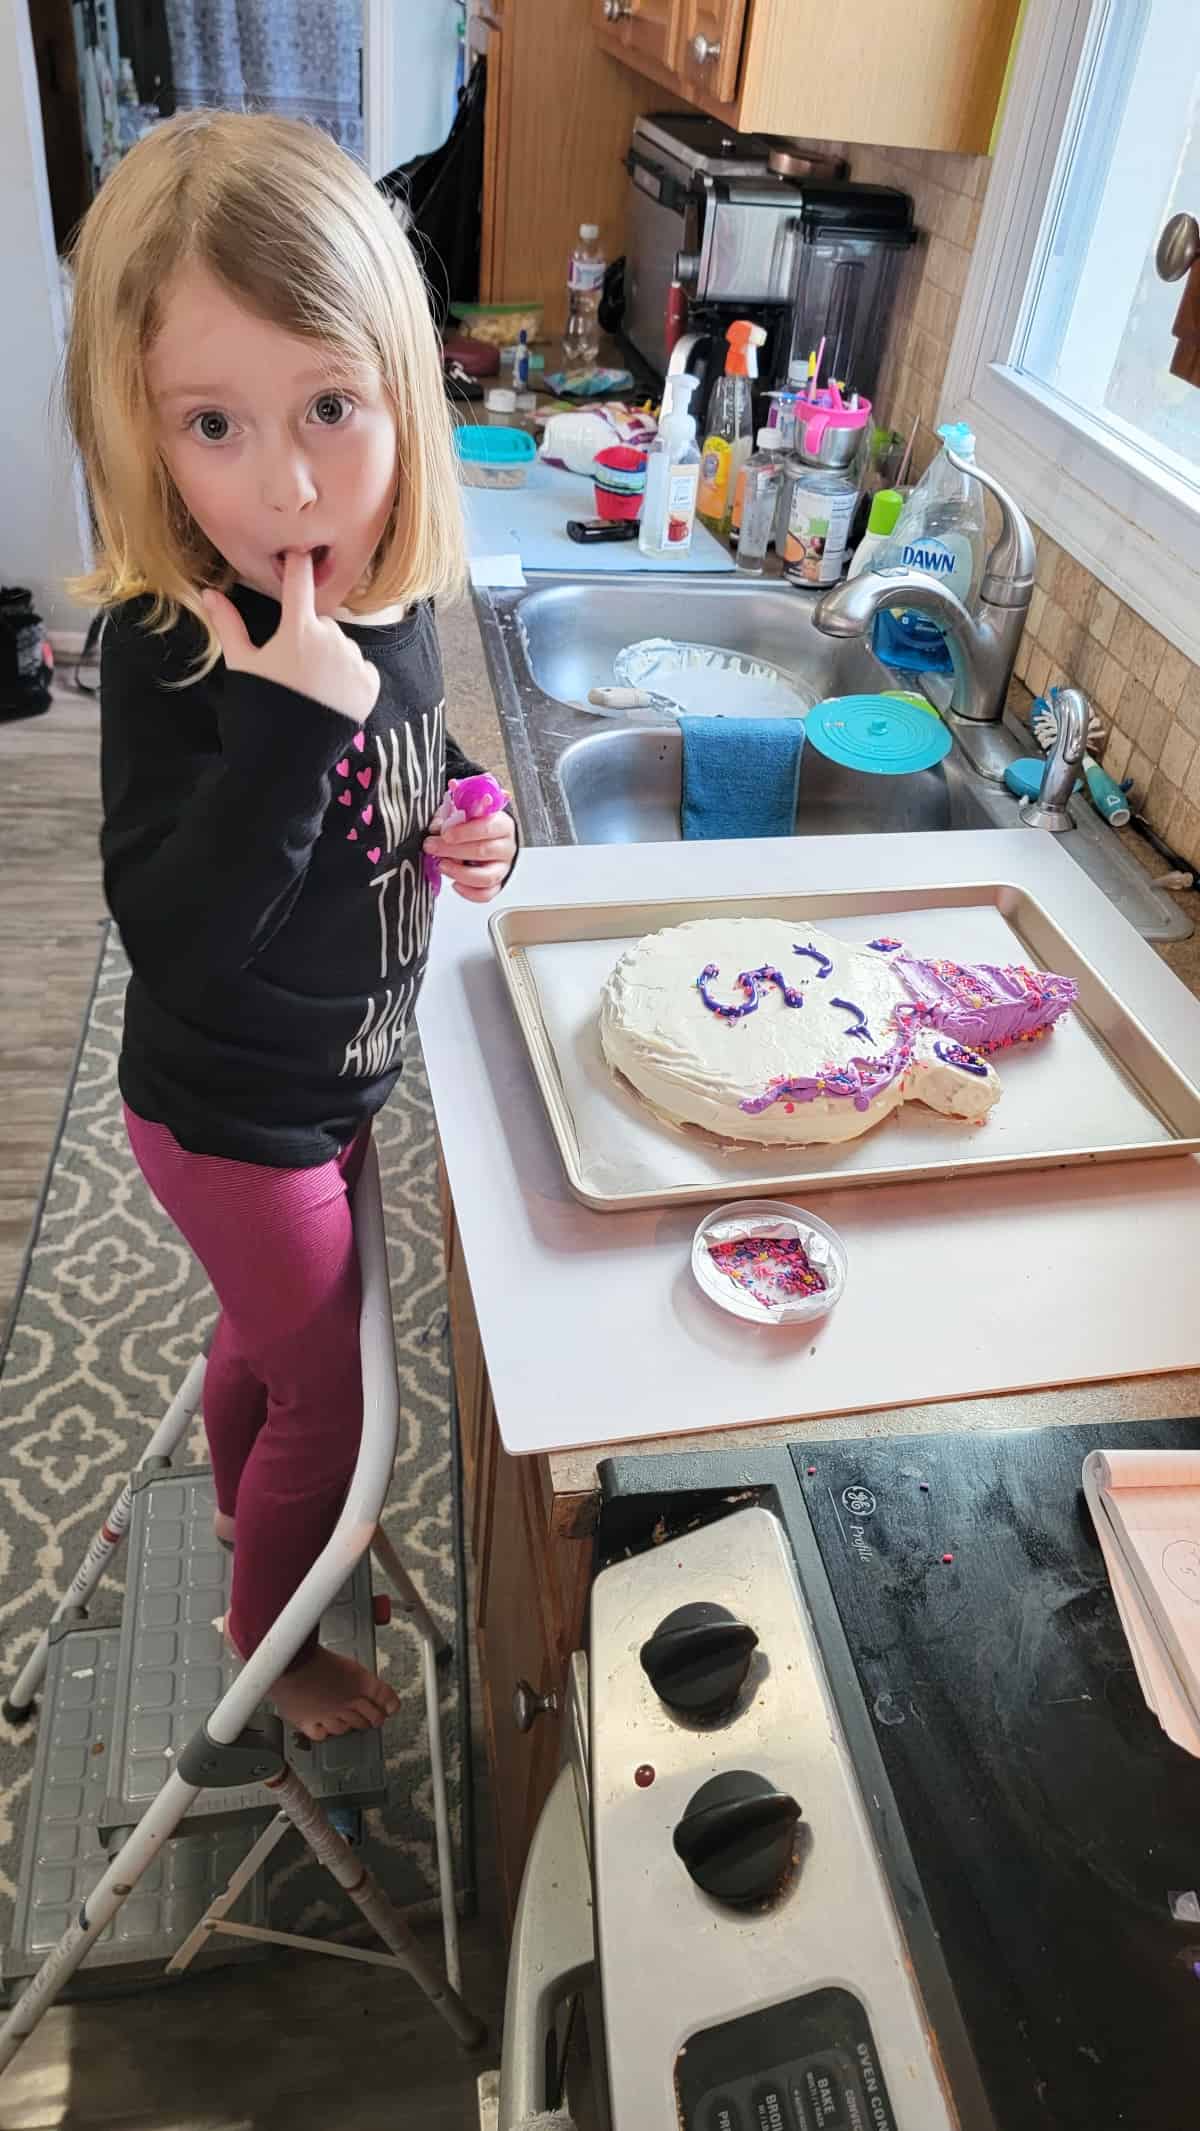 Daughter with cake